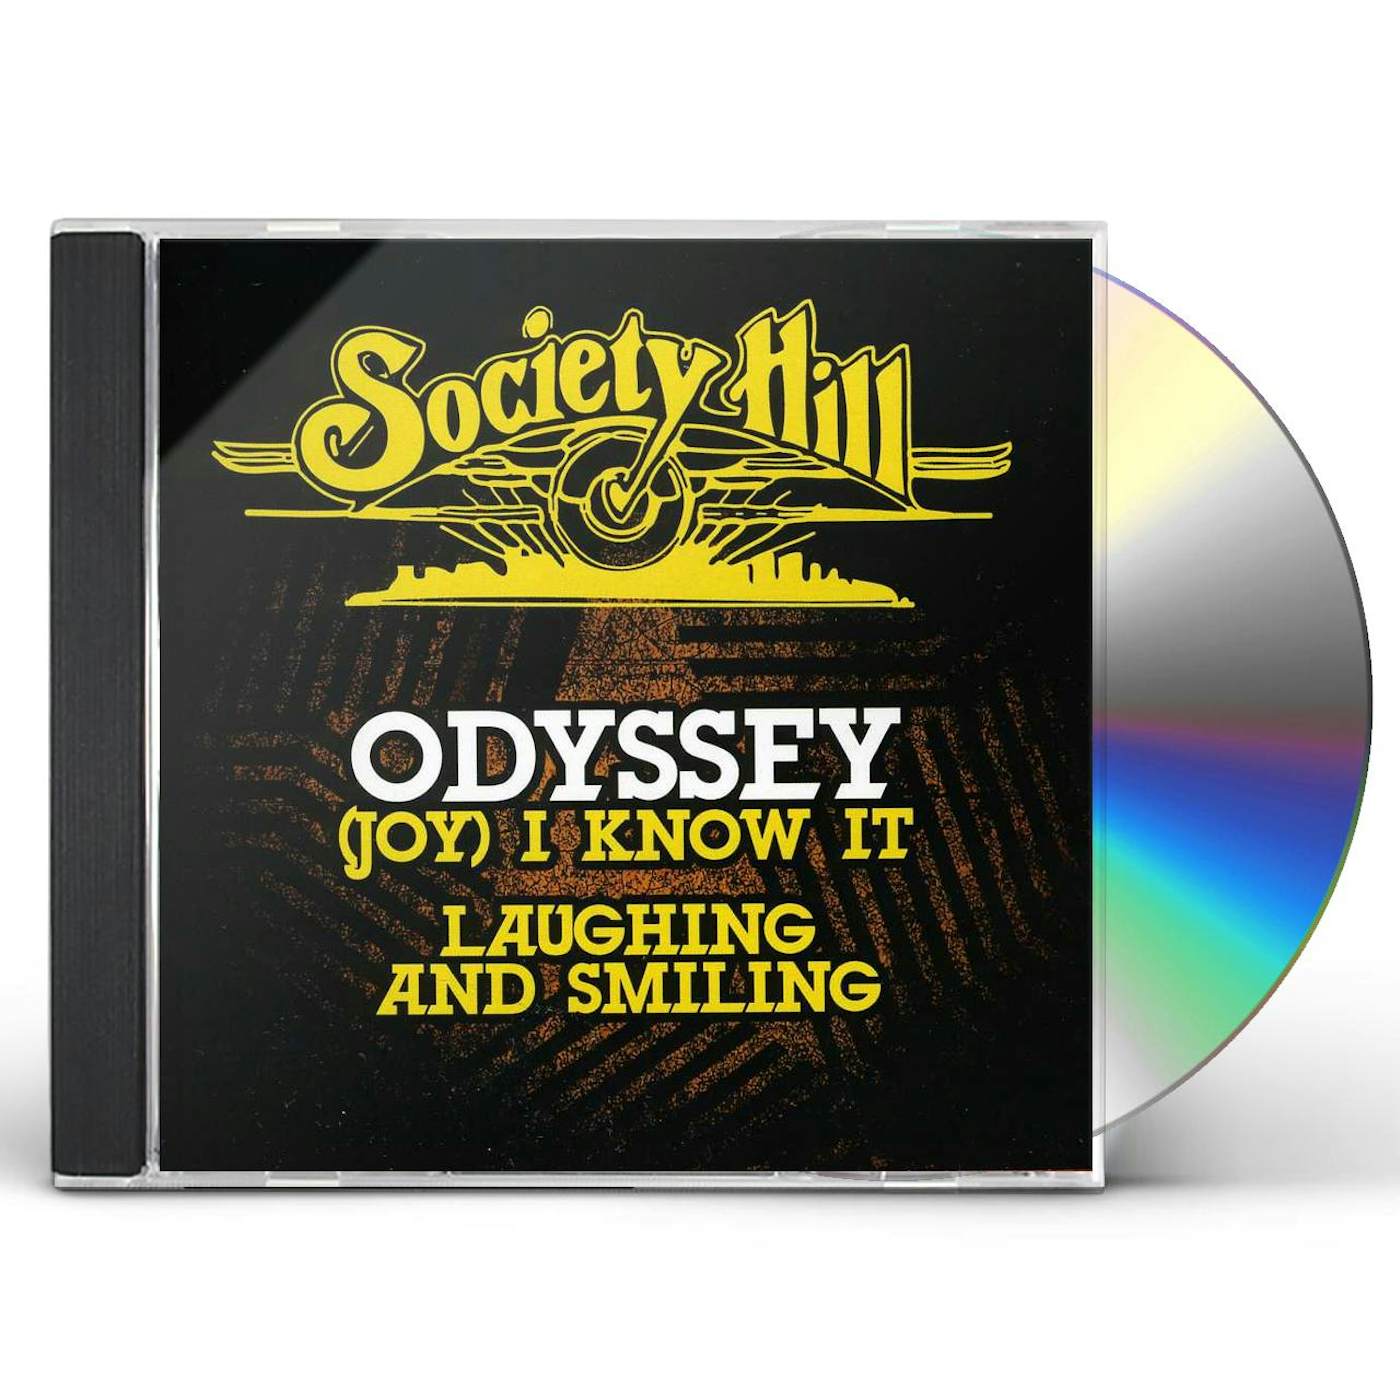 Odyssey (JOY) I KNOW IT / LAUGHING AND SMILING CD